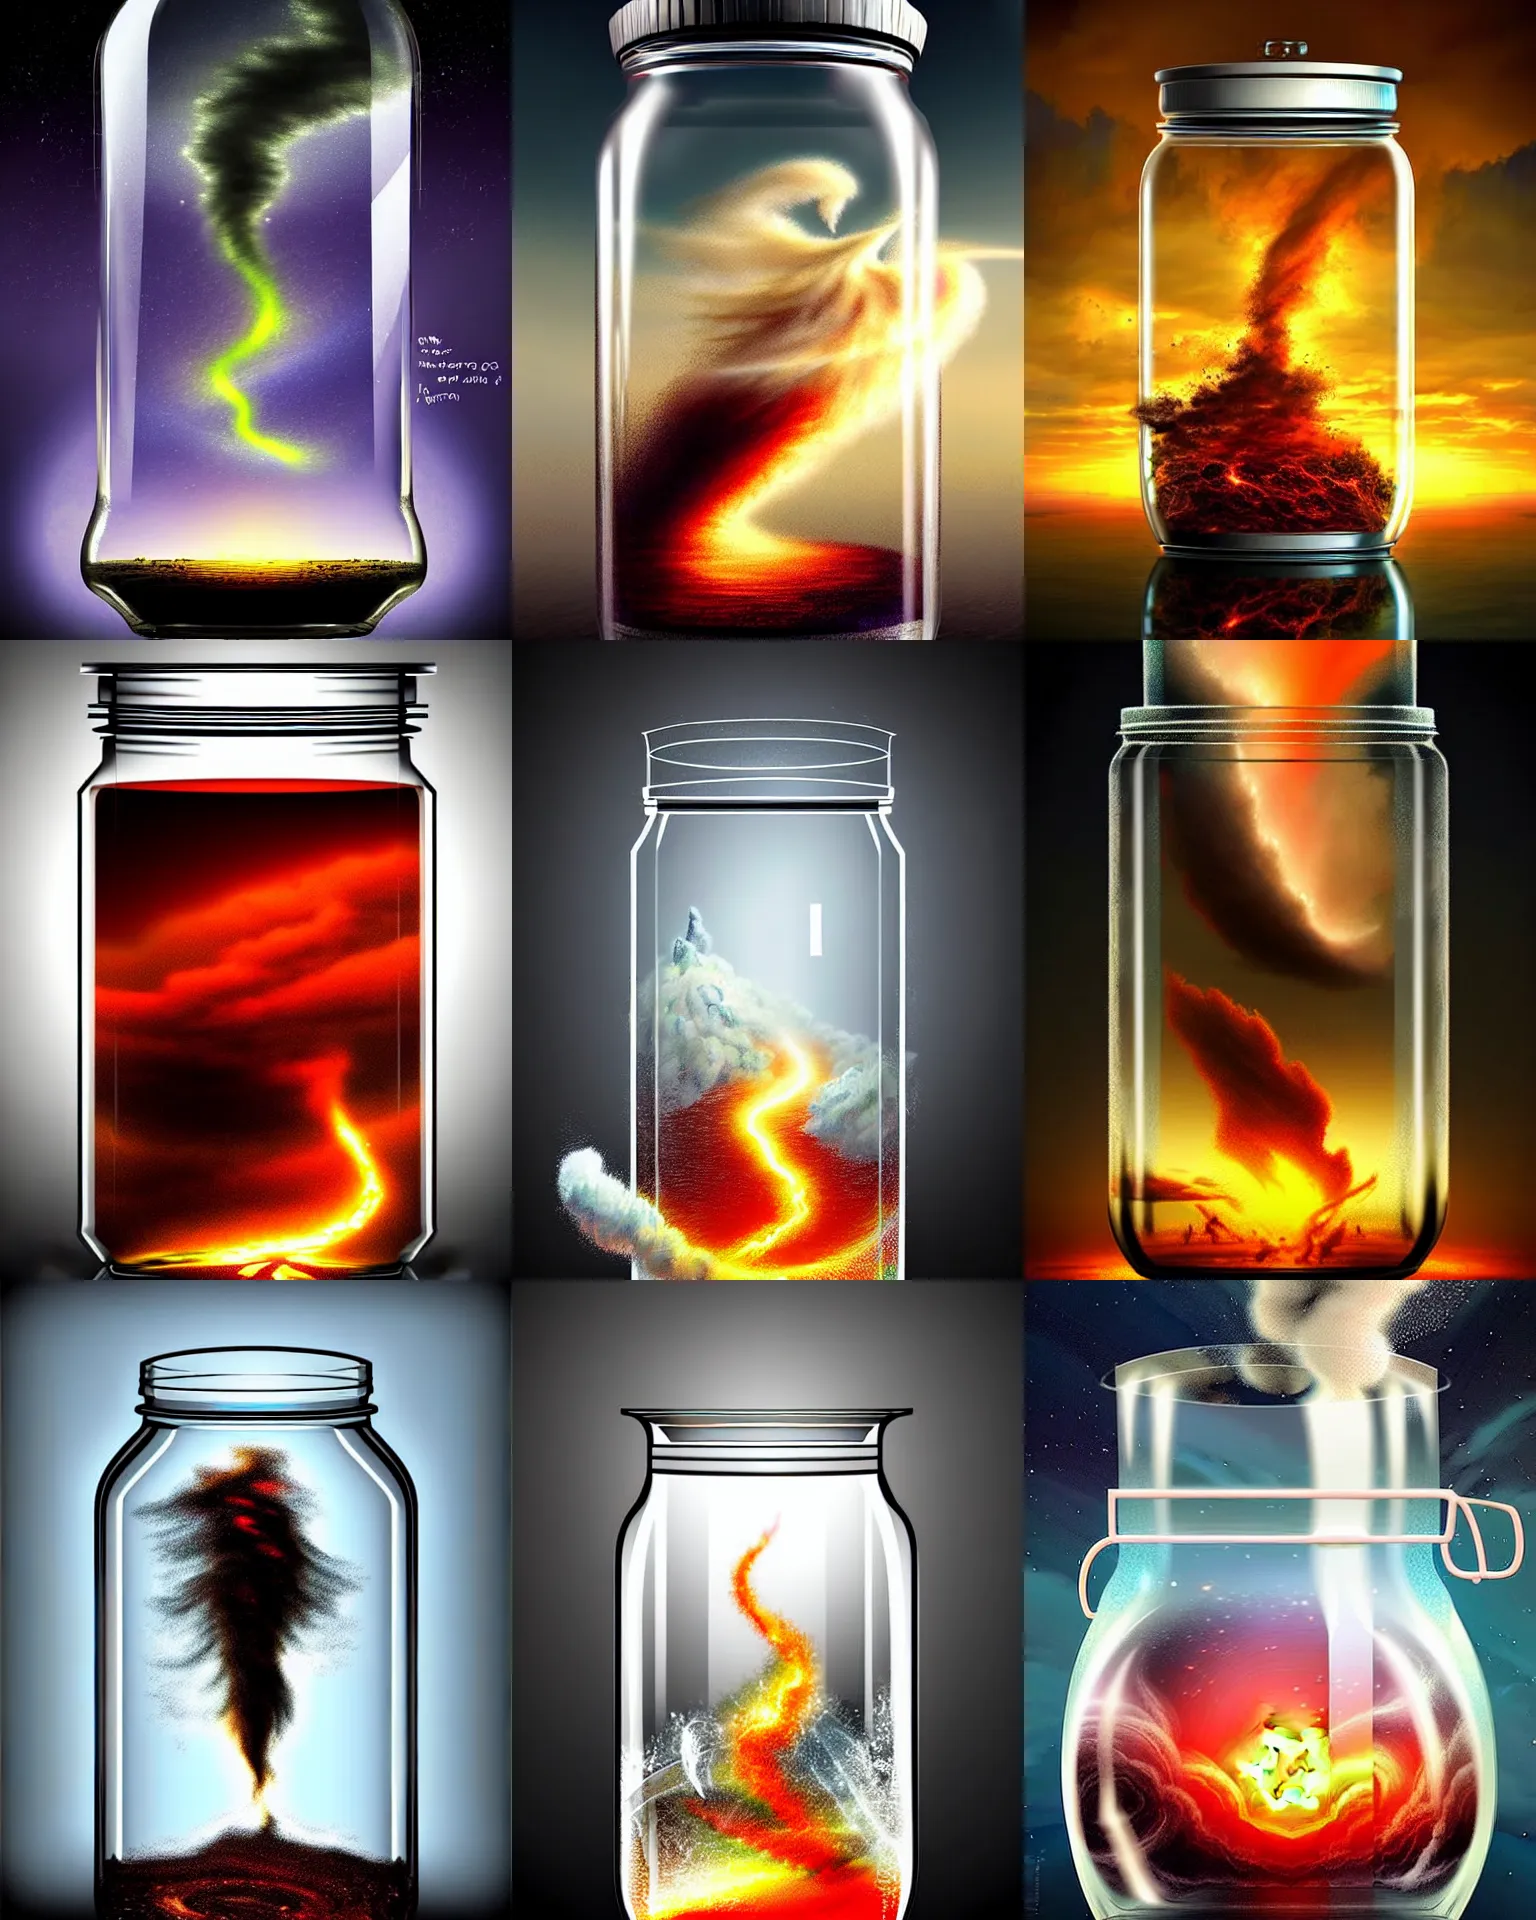 Prompt: epic professional digital art of tornado in a glass jar, best on artstation, cgsociety, wlop, Behance, pixiv, astonishing, impressive, cosmic, outstanding epic, stunning, gorgeous, much detail, much wow, masterpiece !dream epic professional digital art of tornado in a glass jar, best on artstation, cgsociety, wlop, Behance, pixiv, astonishing, impressive, cosmic, outstanding epic, stunning, gorgeous, much detail, much wow, masterpiece